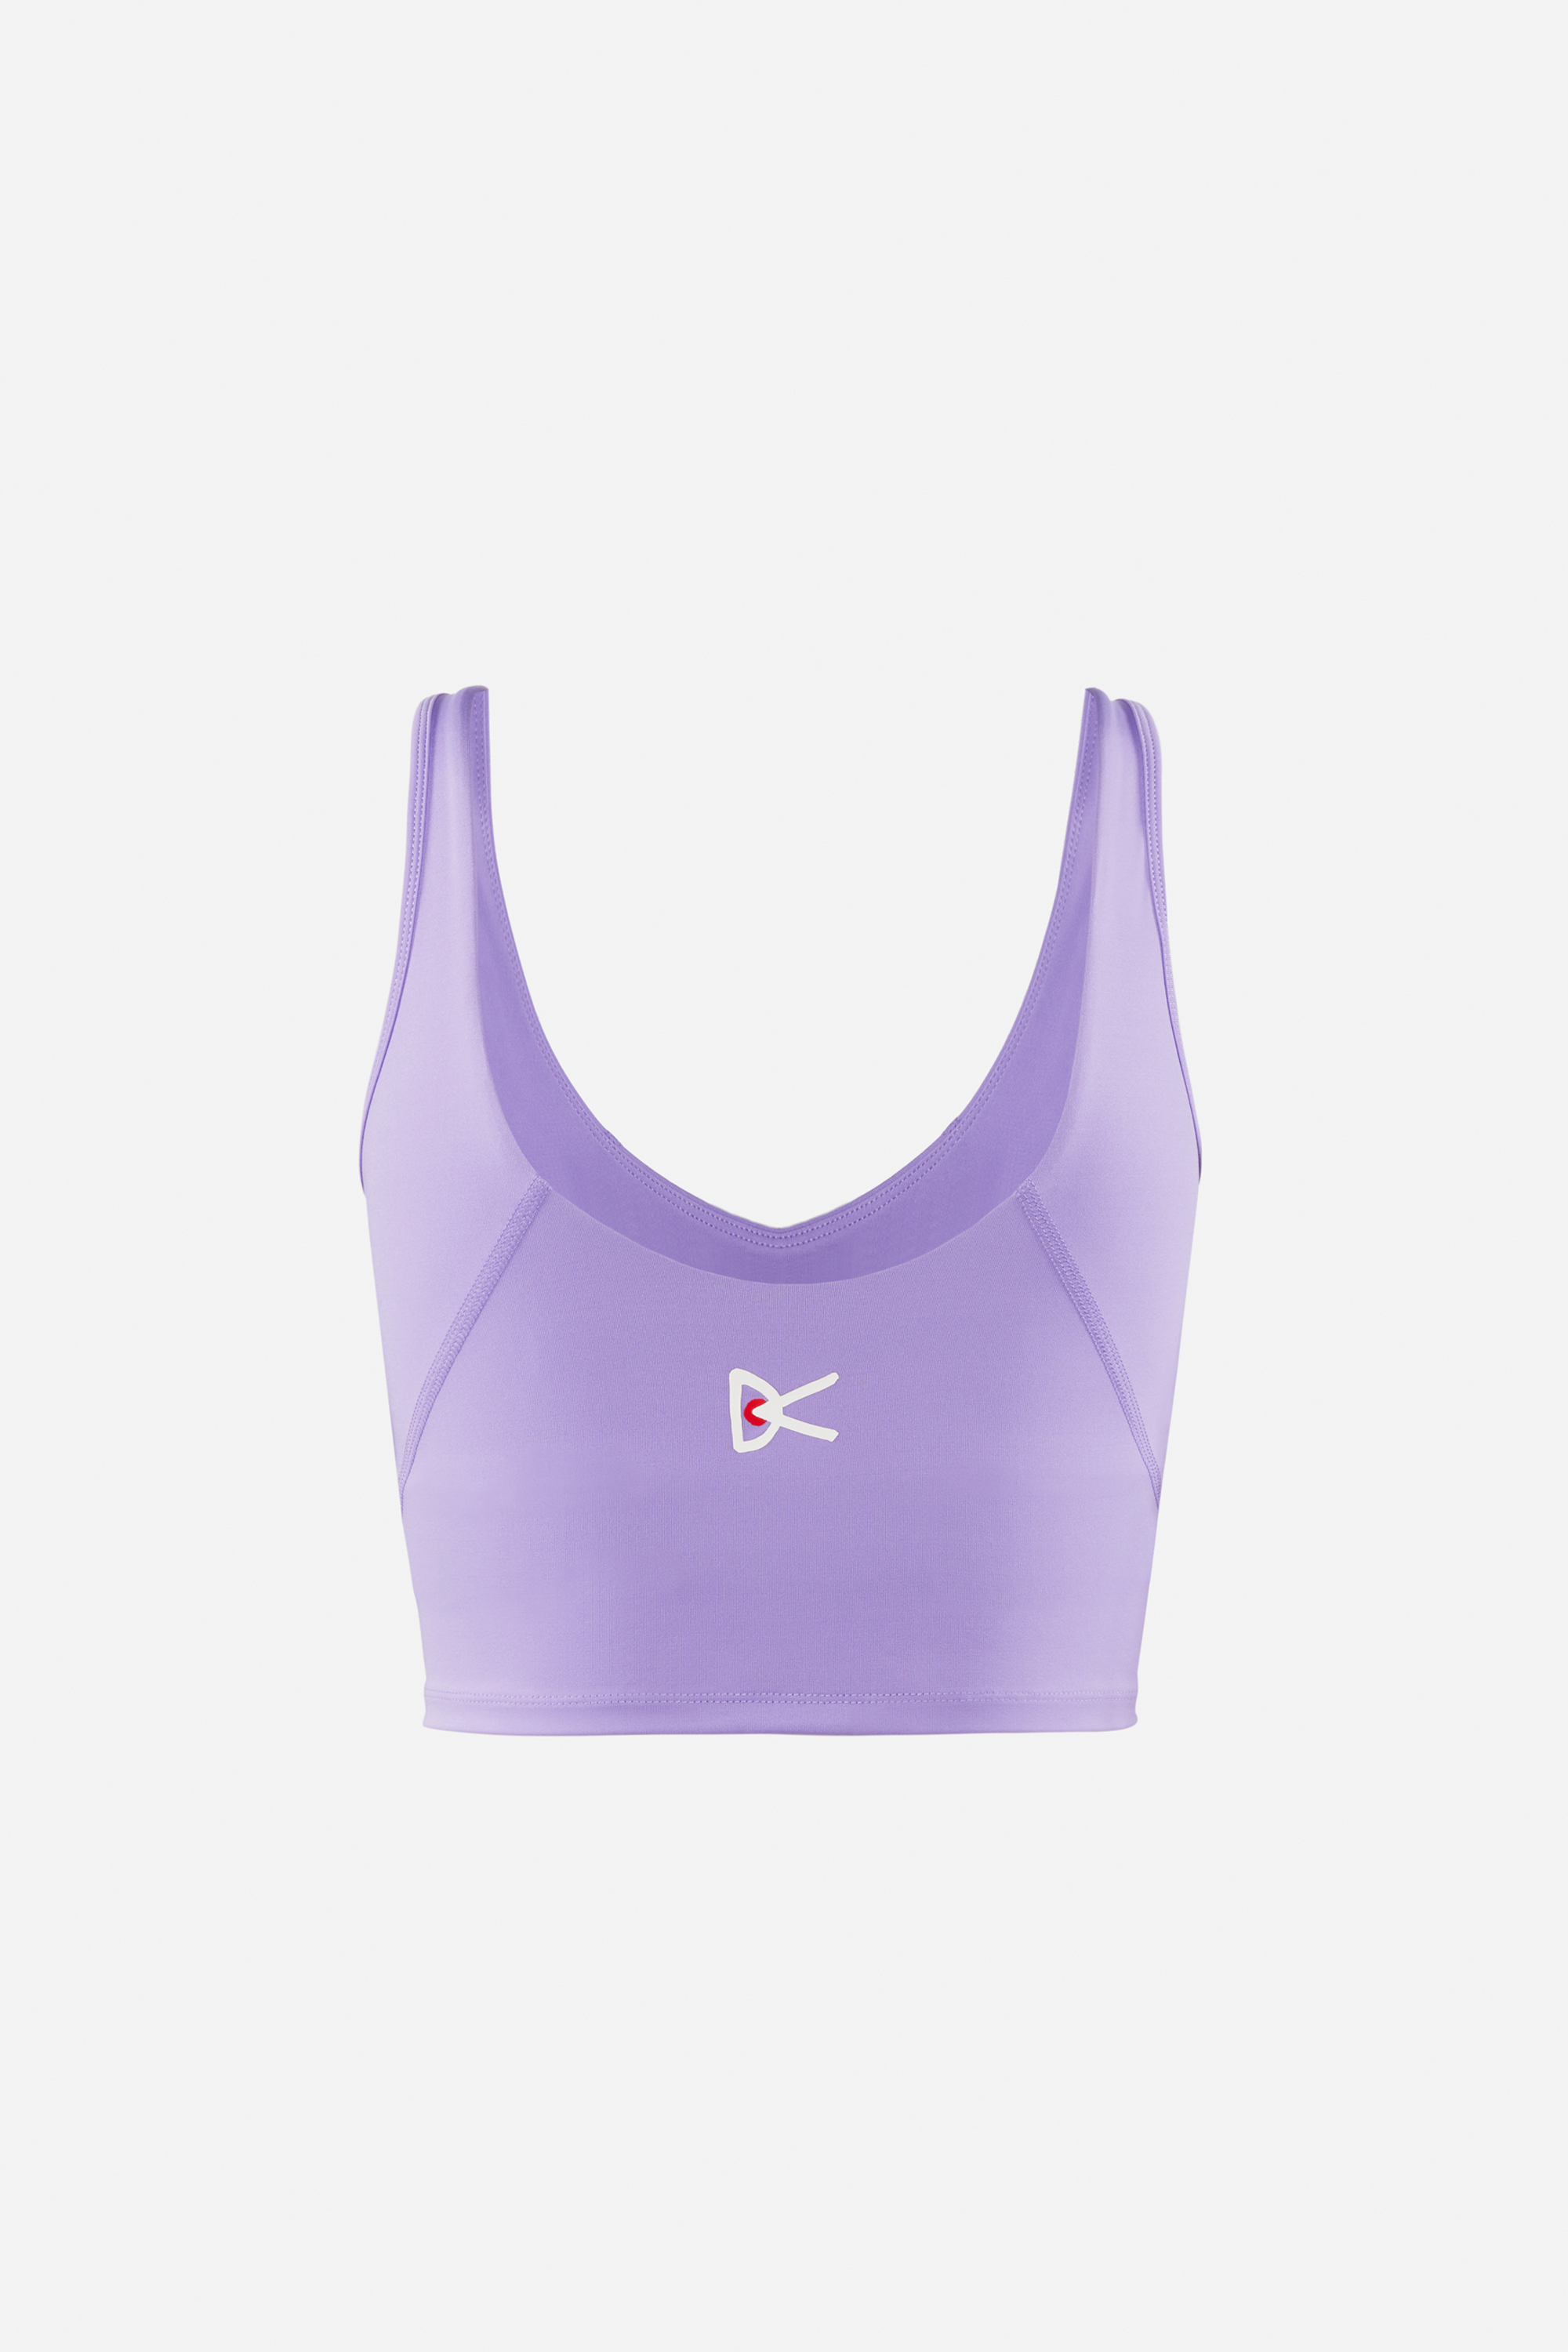 Women's Light Support Strappy Longline Sports Bra - All In Motion™ Lavender  M : Target